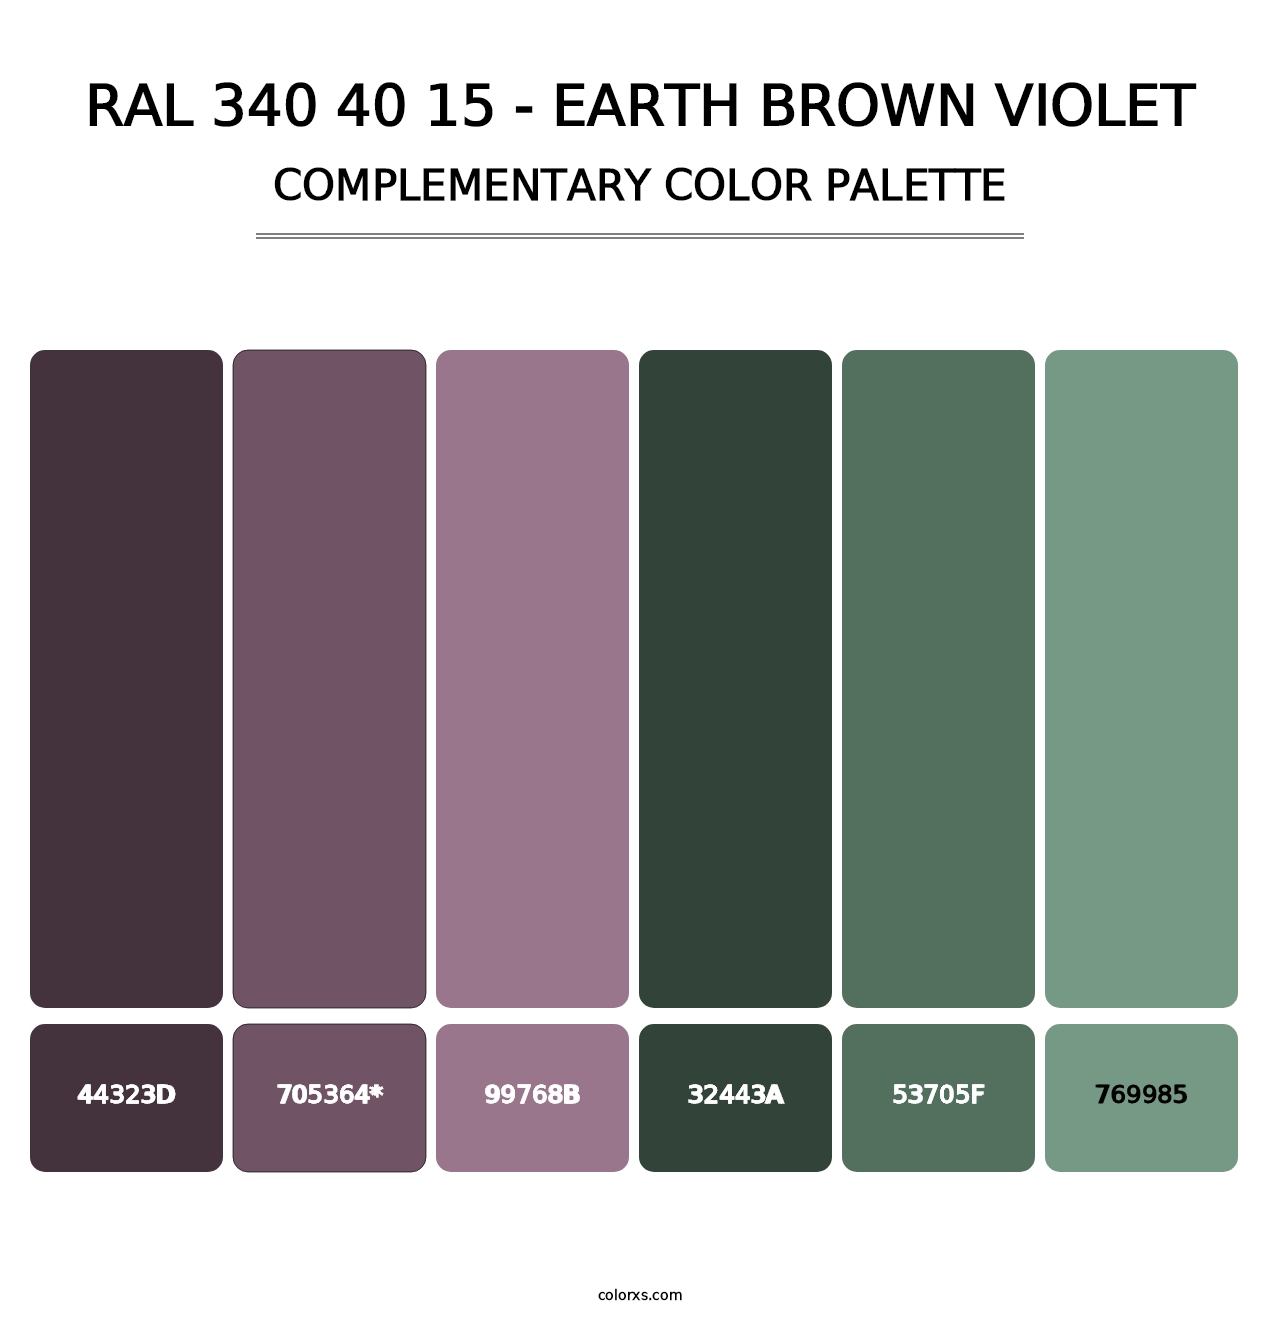 RAL 340 40 15 - Earth Brown Violet - Complementary Color Palette